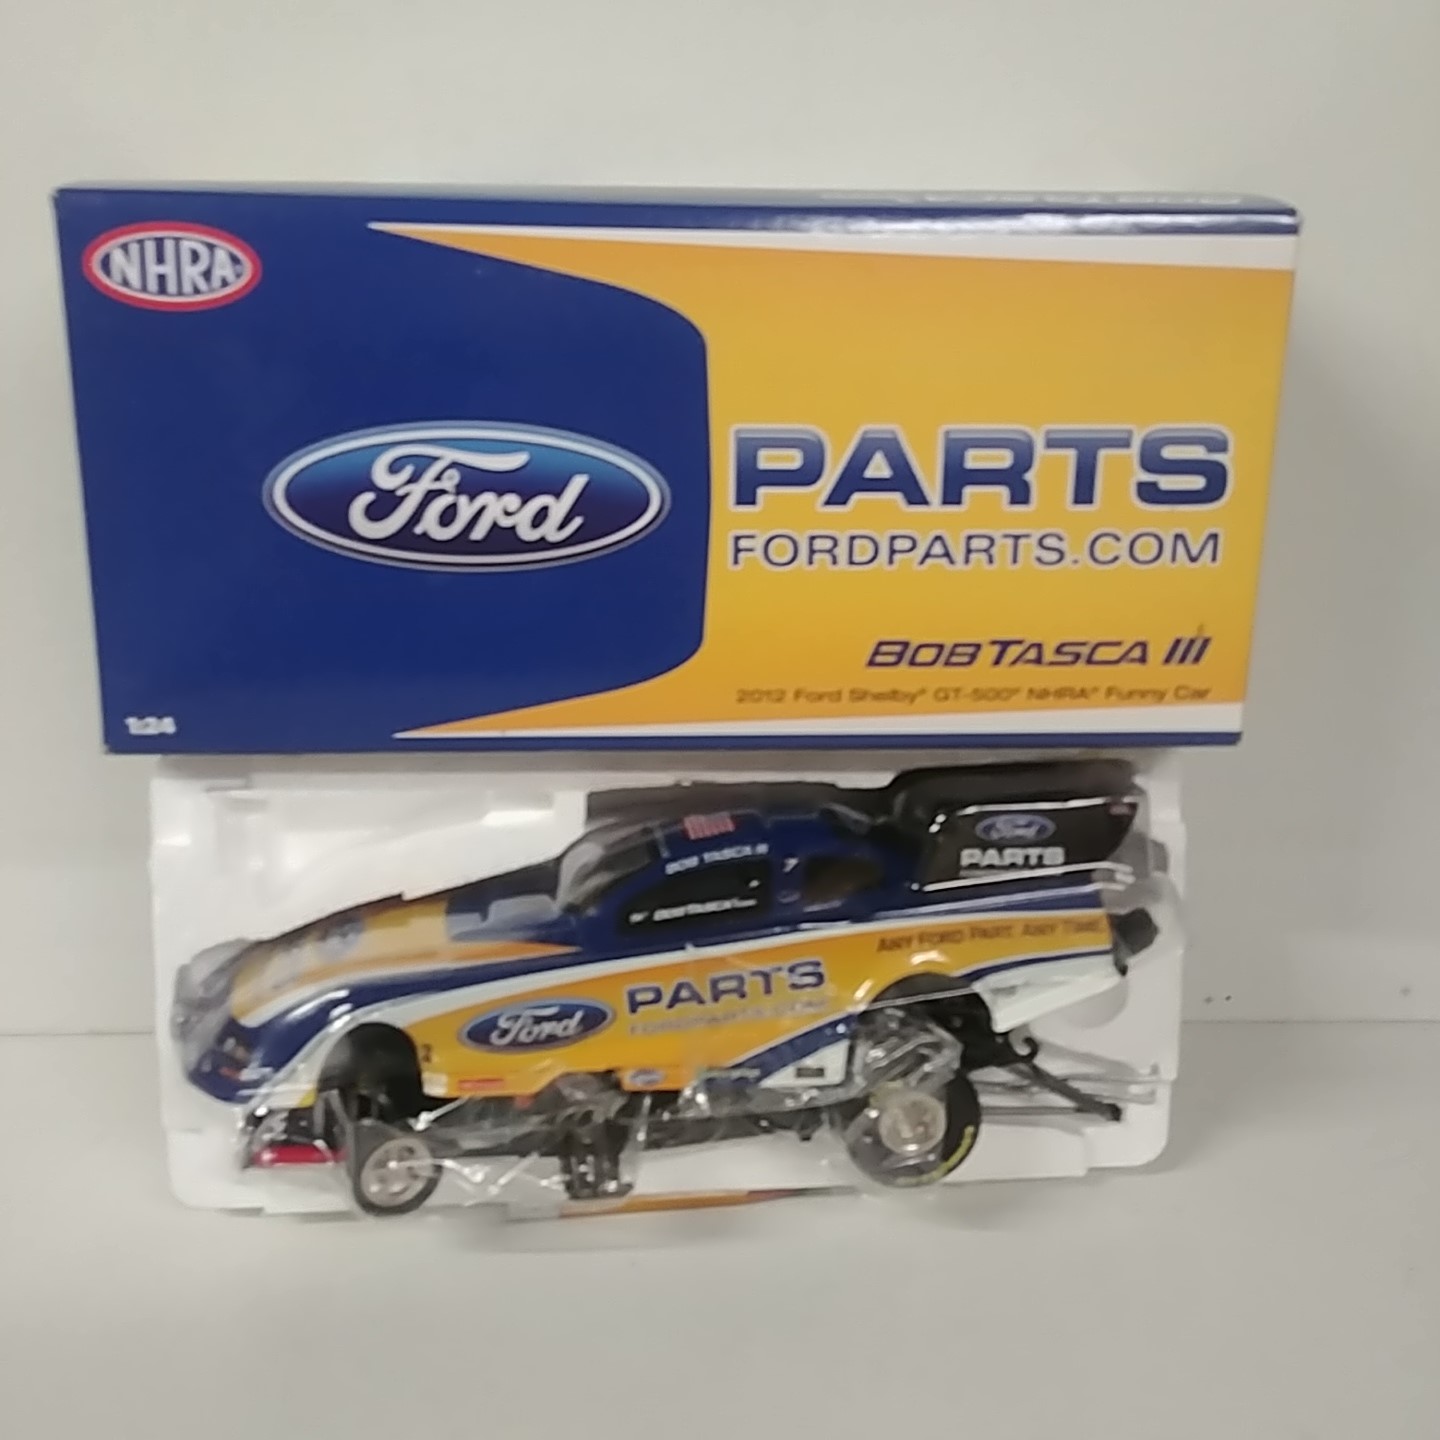 2012 Bob Tasca 1/24th Ford Shelby Mustang funny car